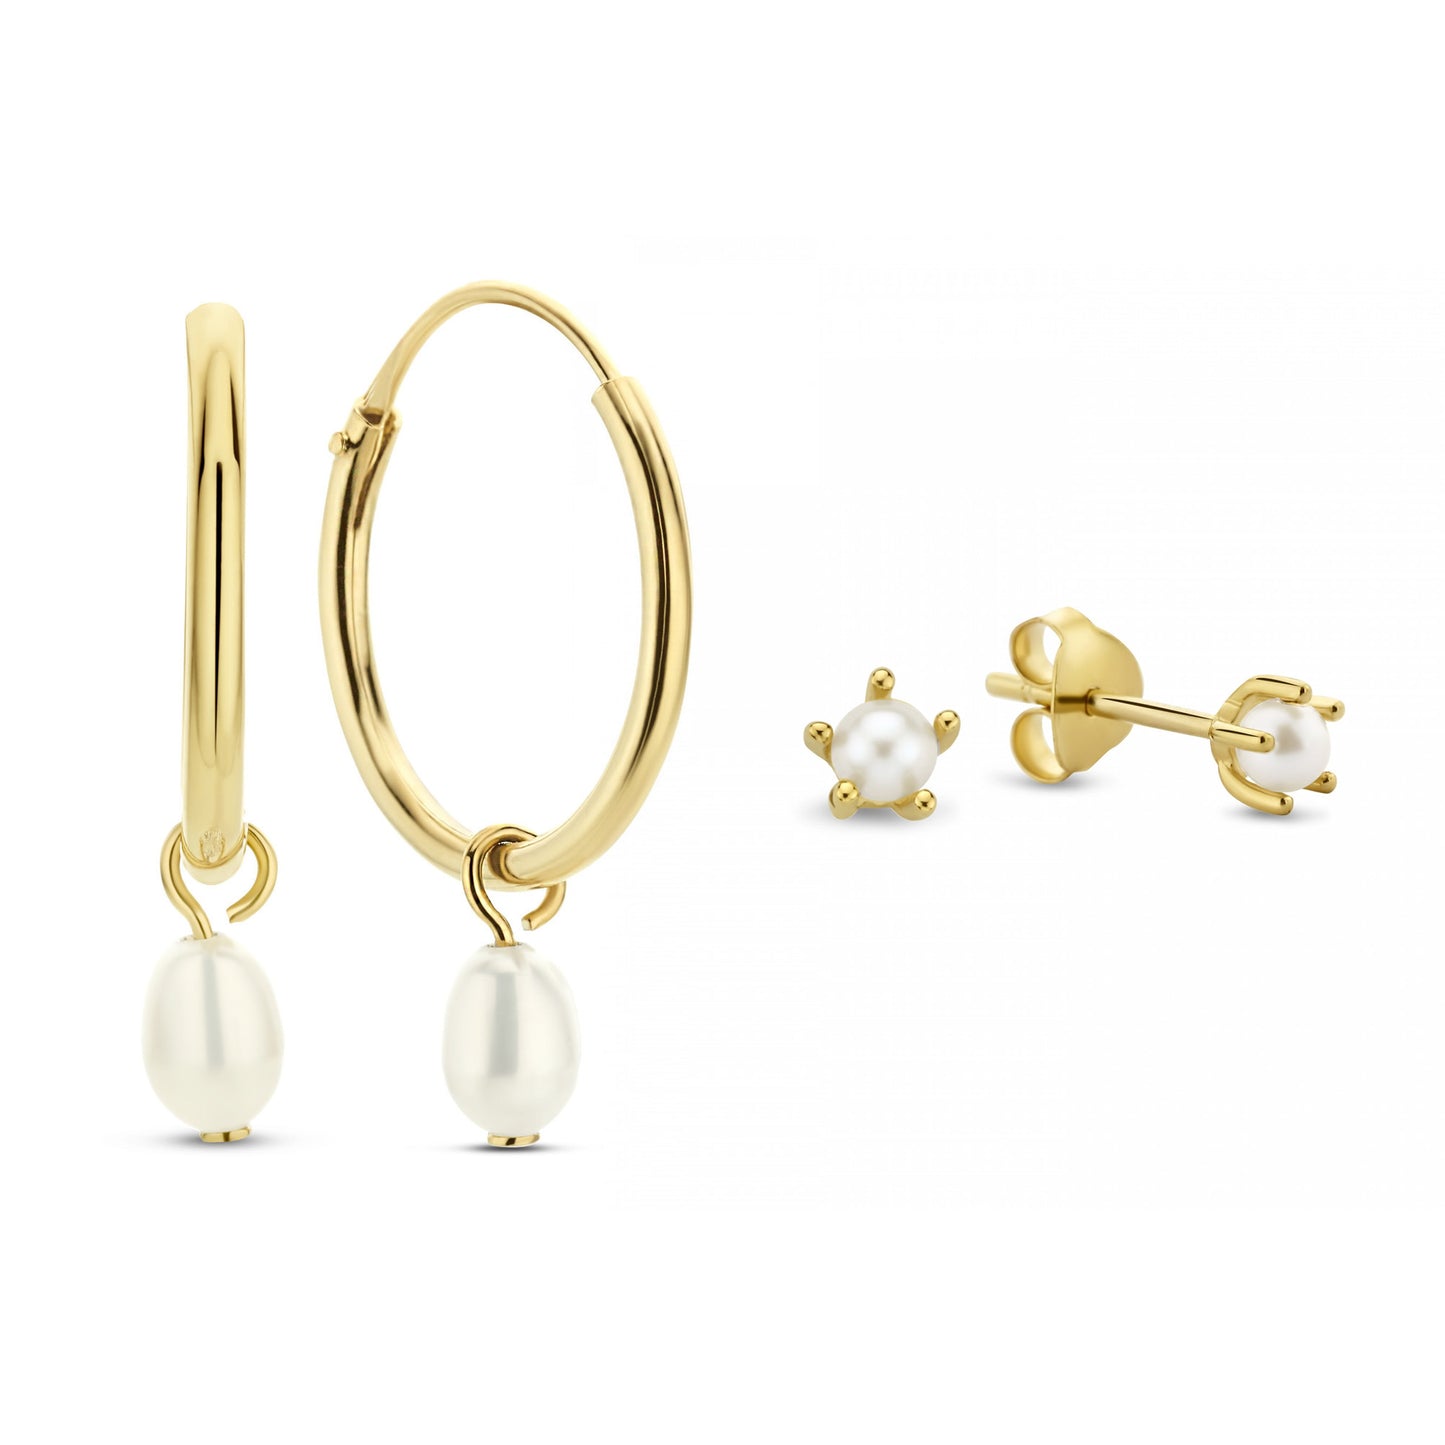 Violet's Gift 925 sterling silver gold plated earrings set with freshwater pearls